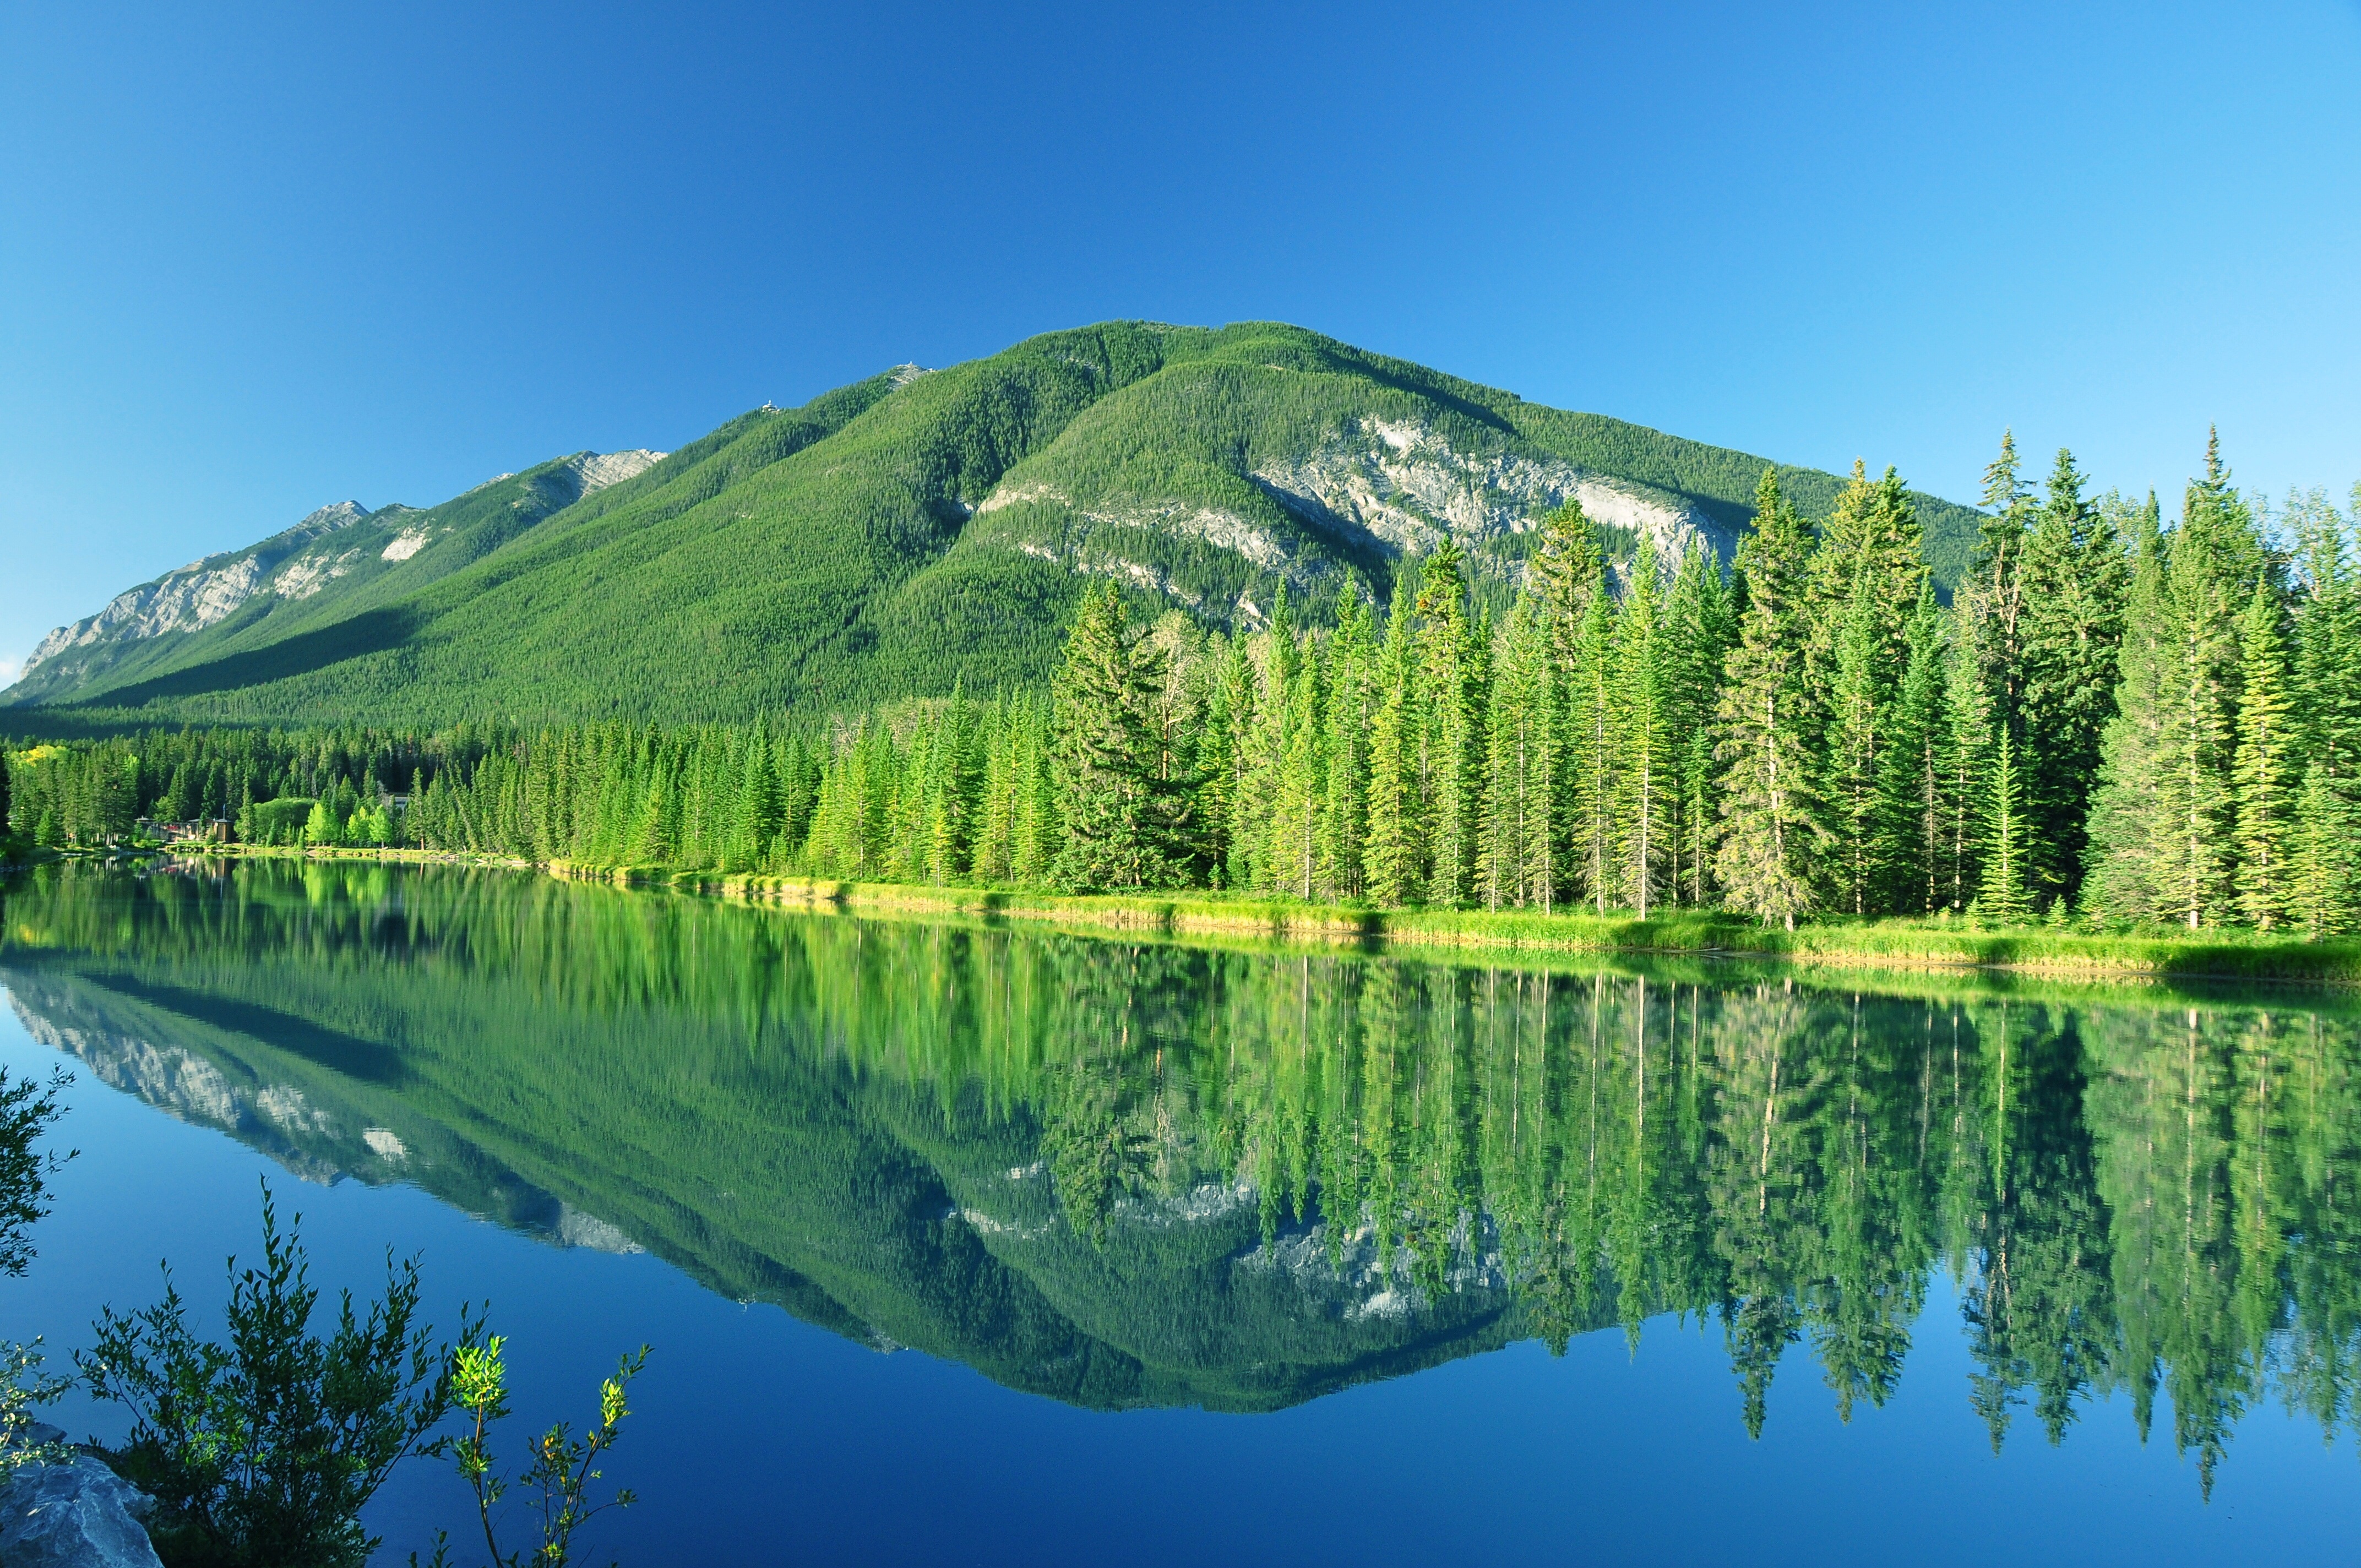 canada, earth, reflection, banff national park, forest, lake, landscape, mountain, tree